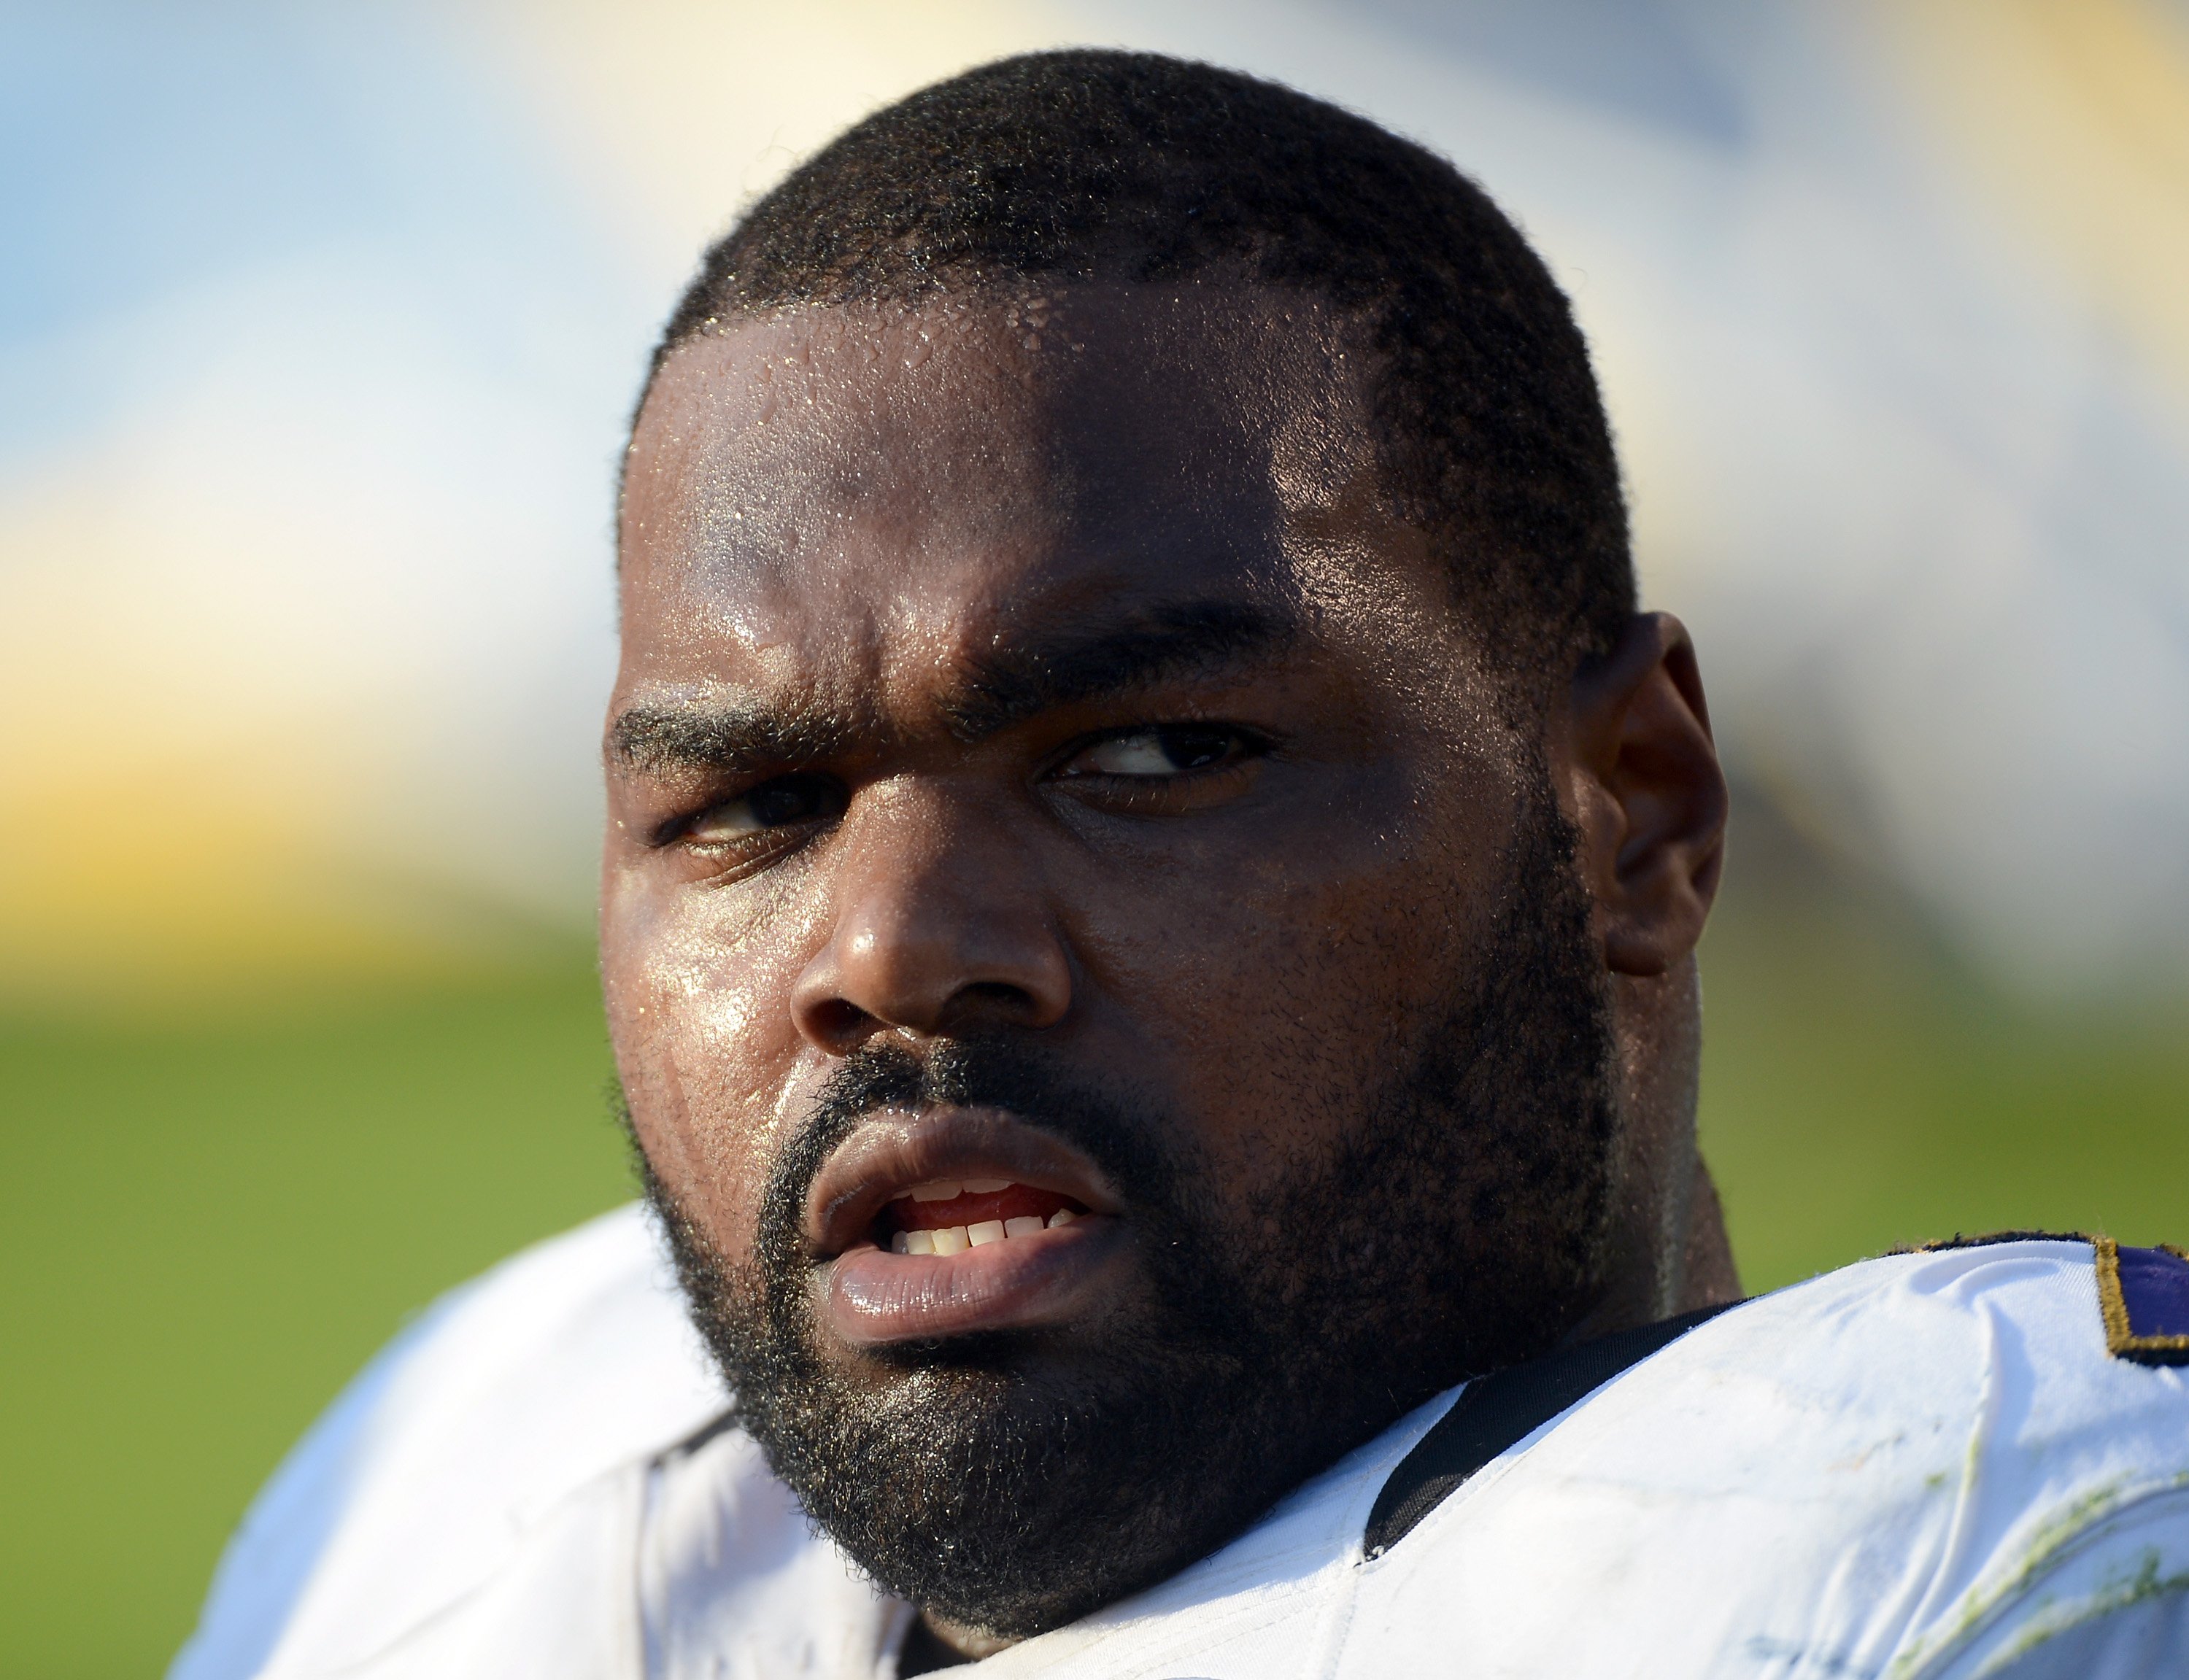  Michael Oher at Qualcomm Stadium in November, 2012 in San Diego, California. | Source: Getty Images